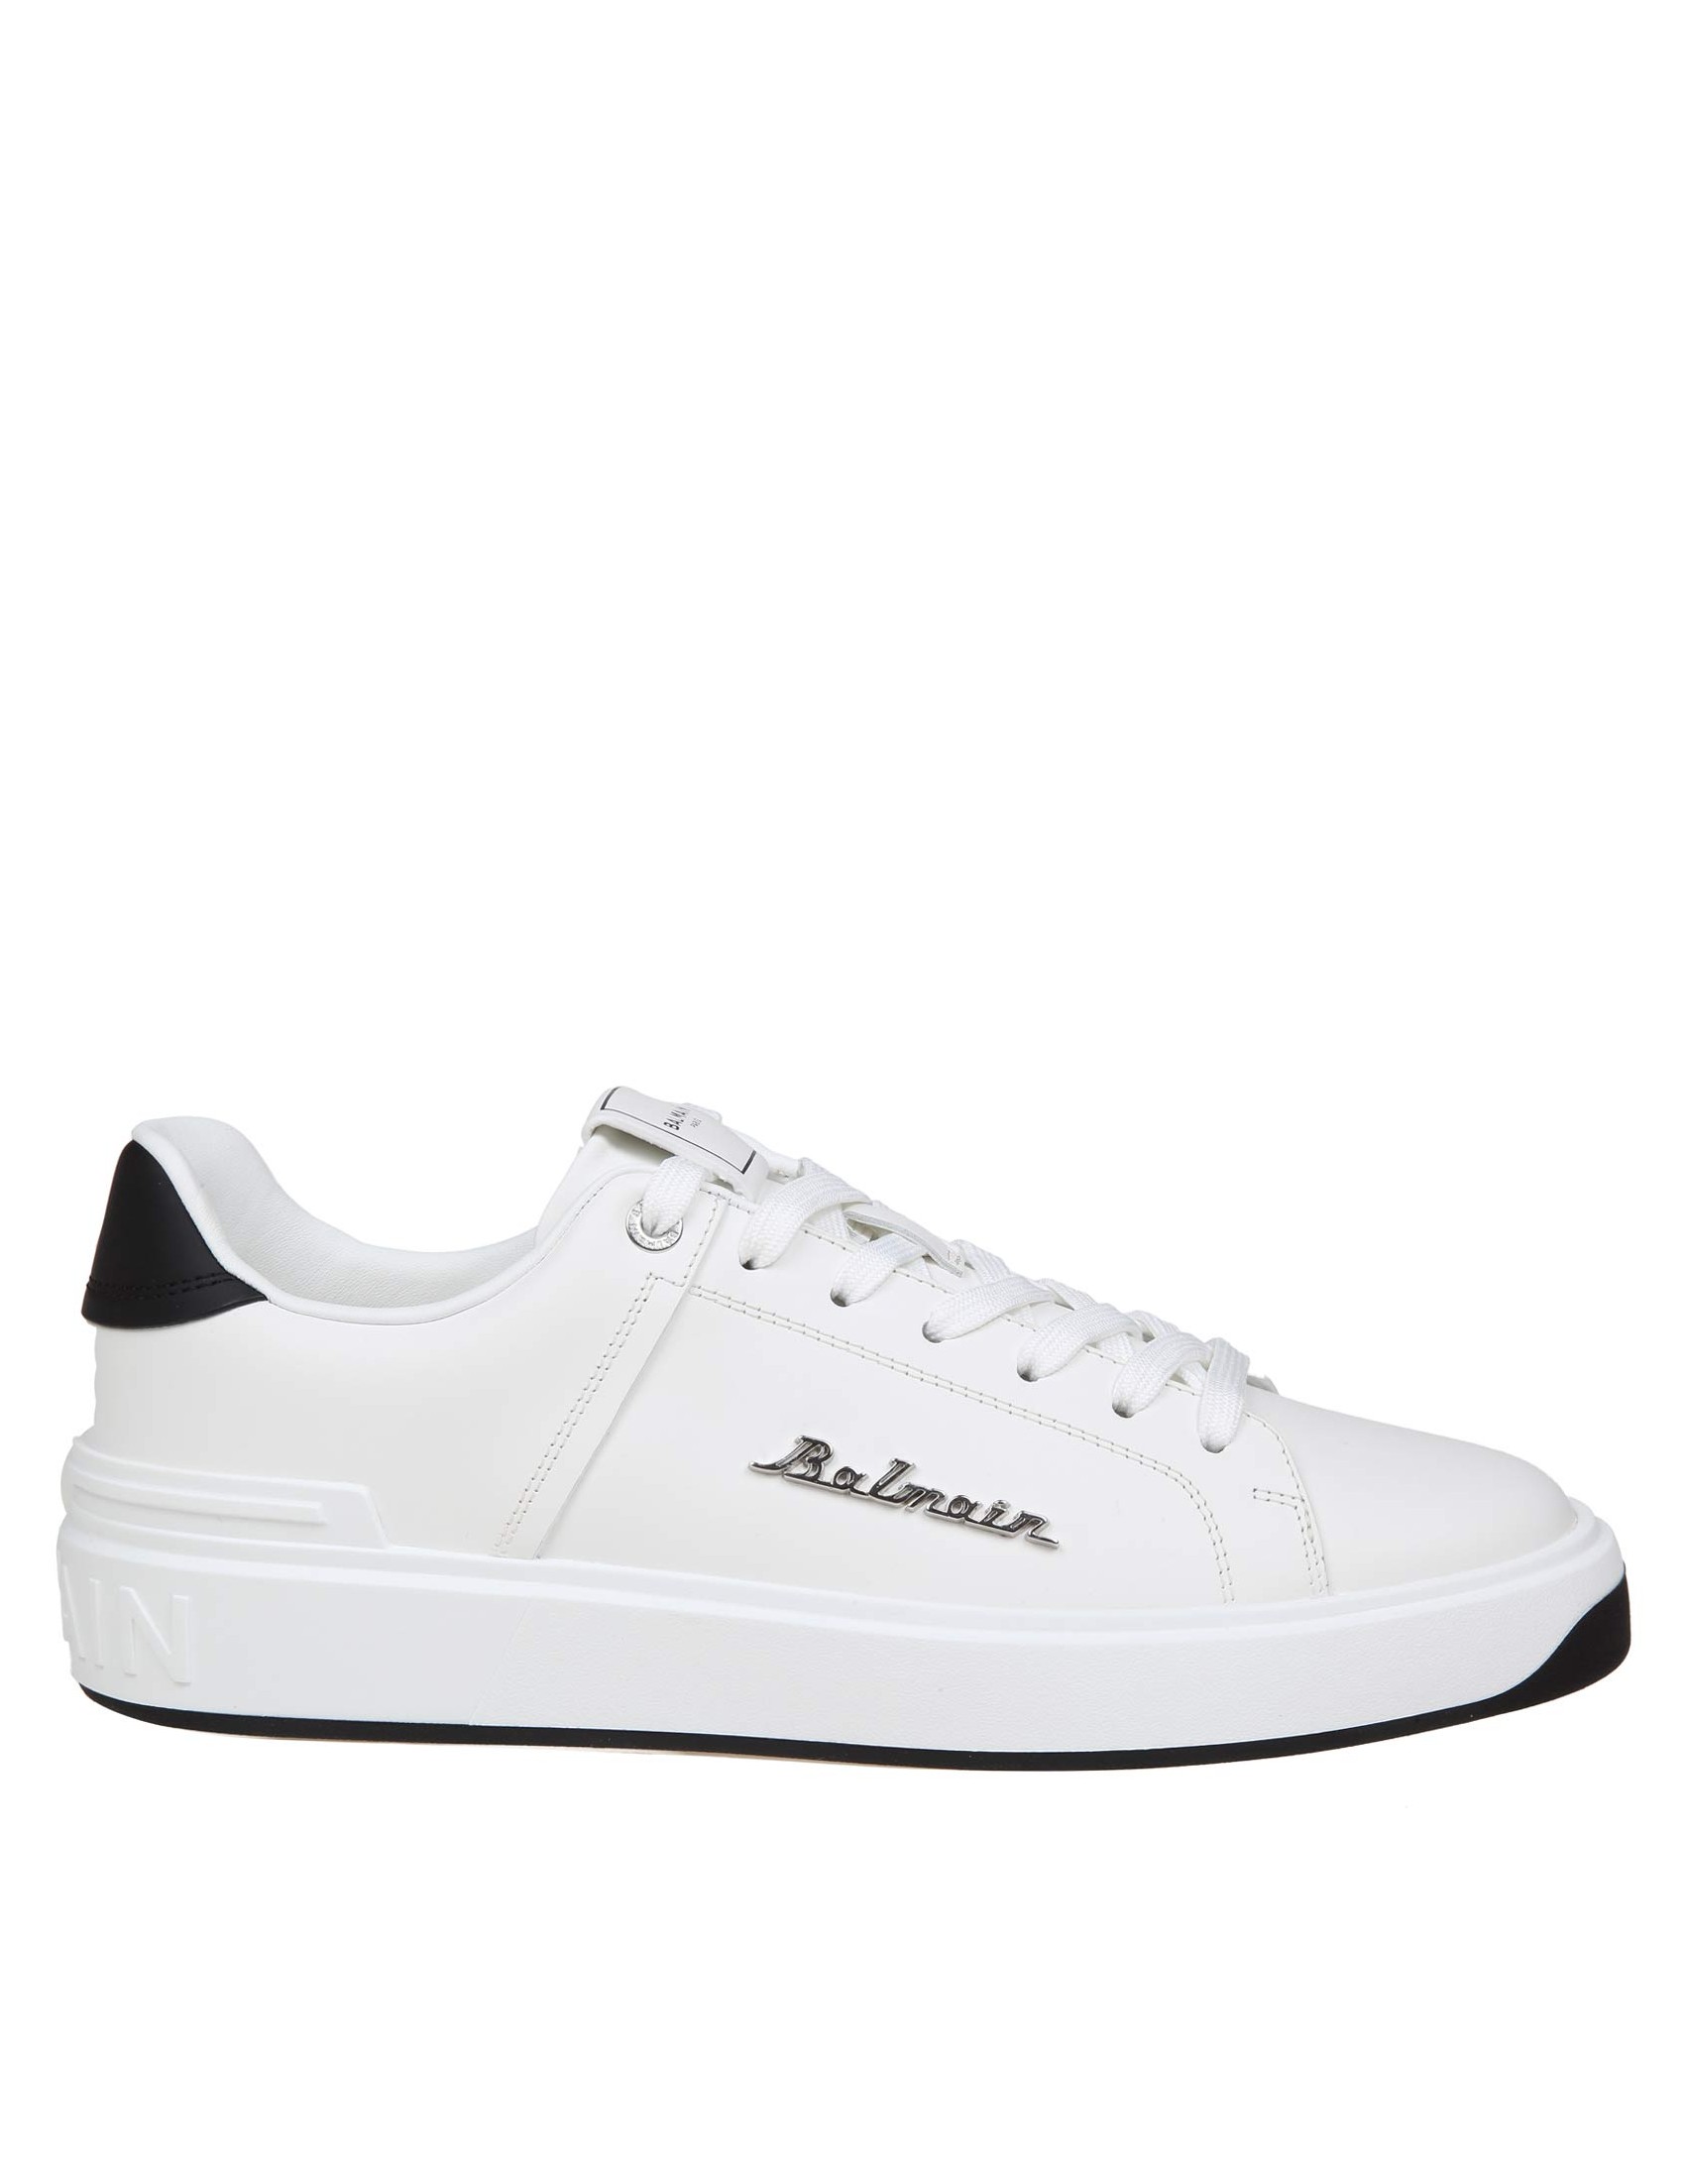 BALMAIN B-COURT SNEAKERS IN BLACK AND WHITE LEATHER